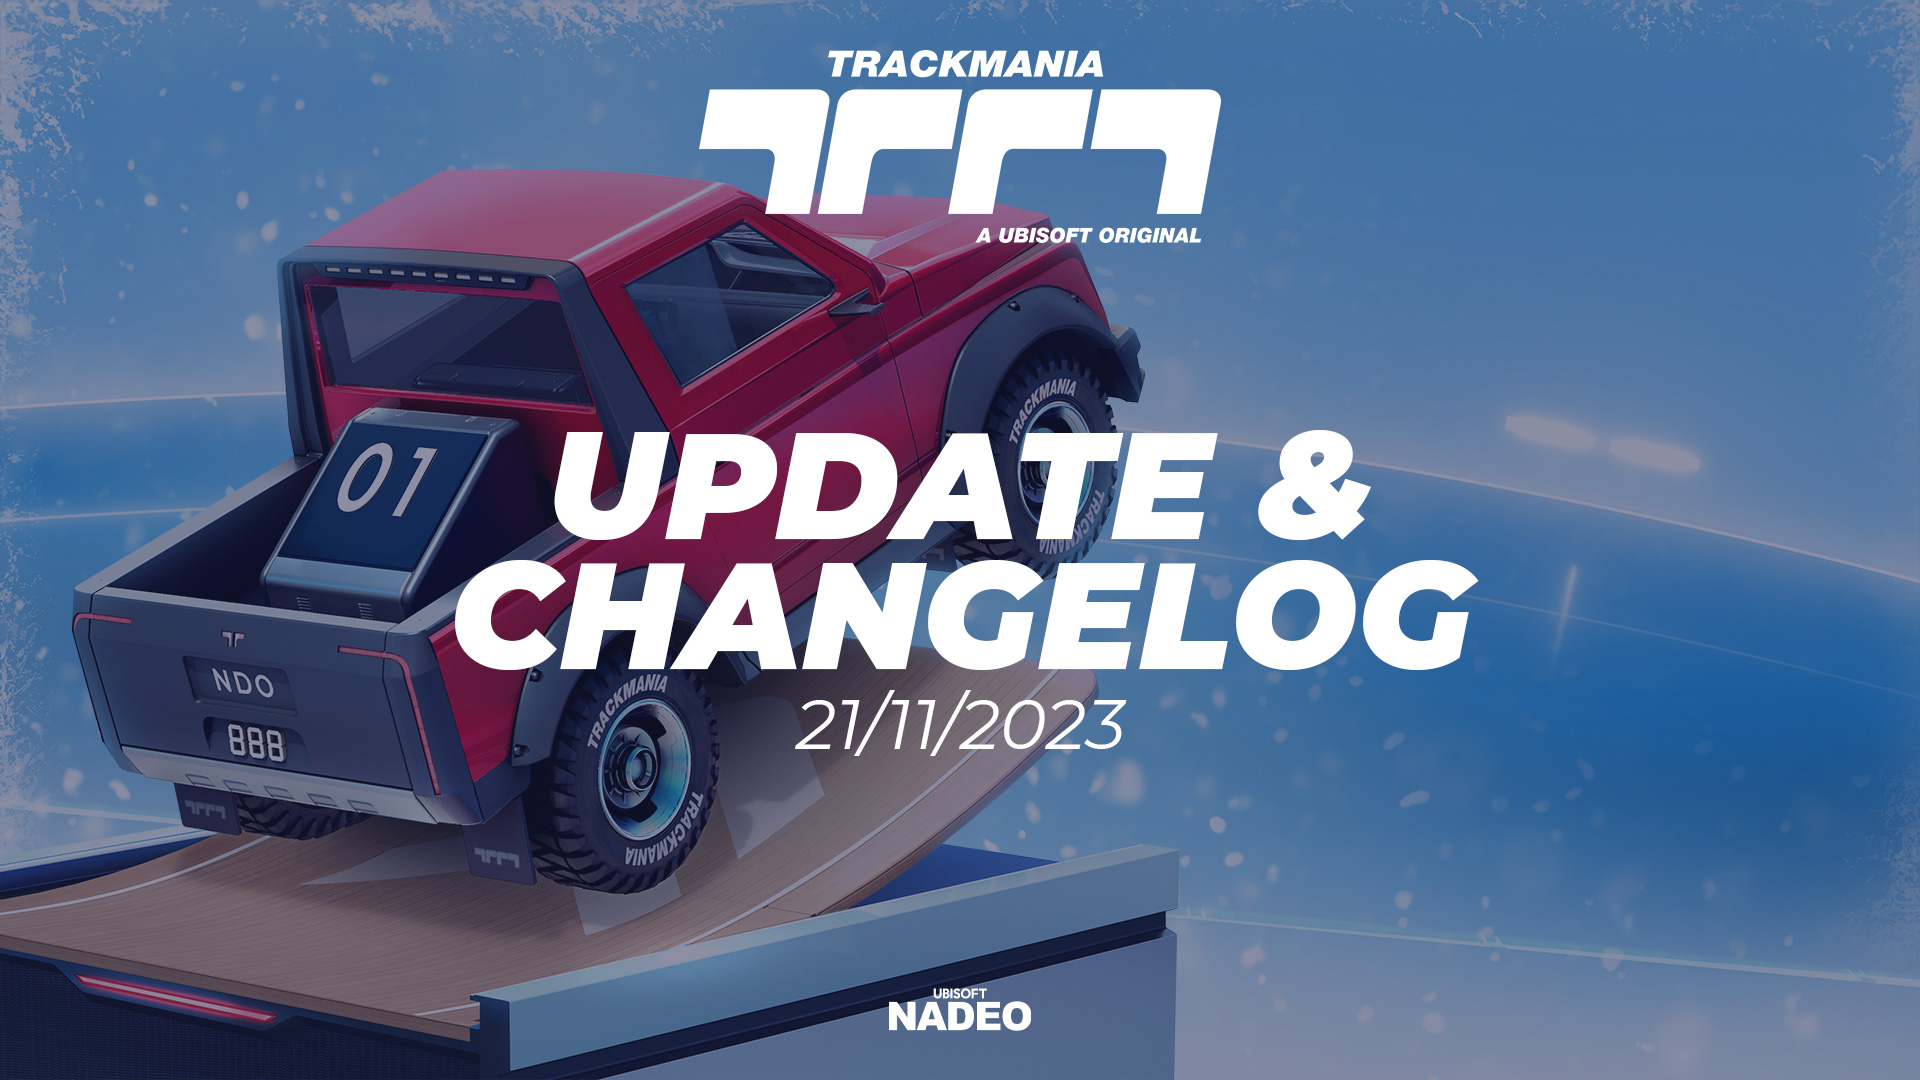 20 years of Trackmania: Update and changelog